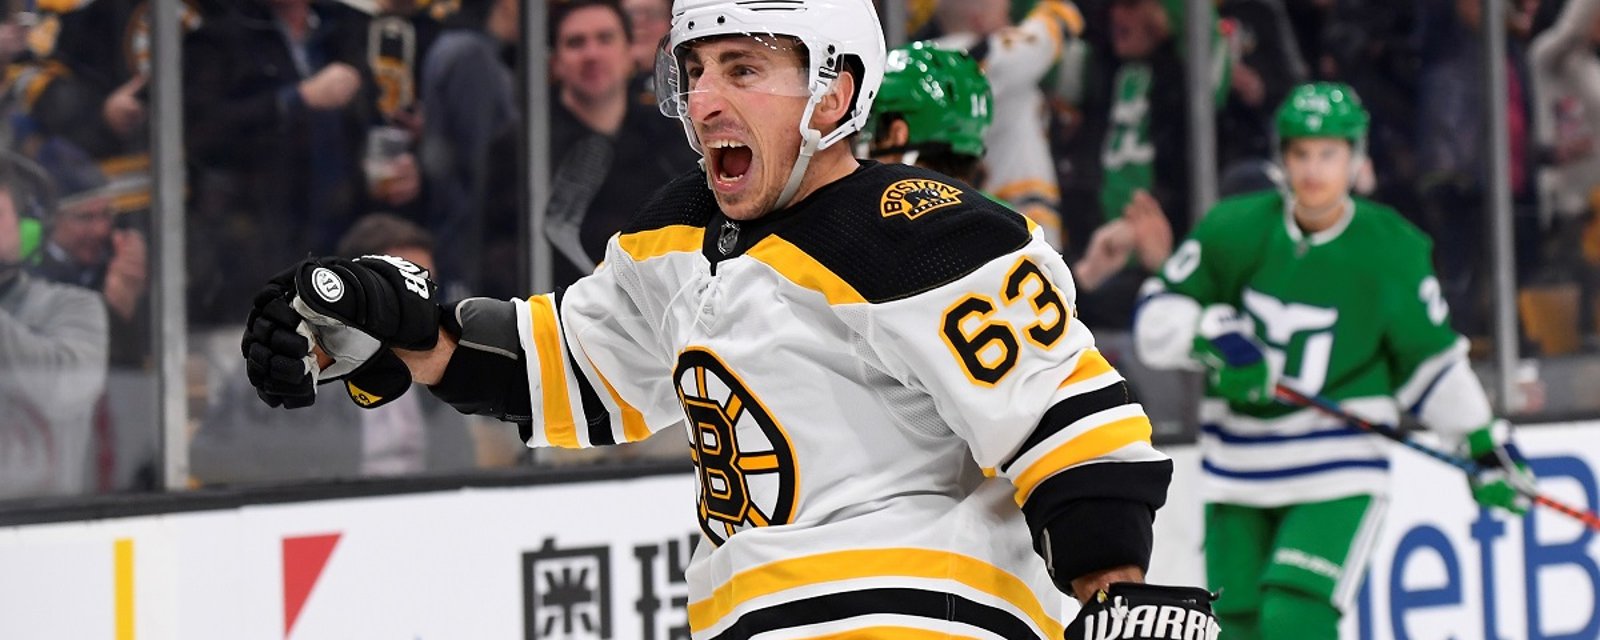 Breaking: Brad Marchand appears to have been injured.